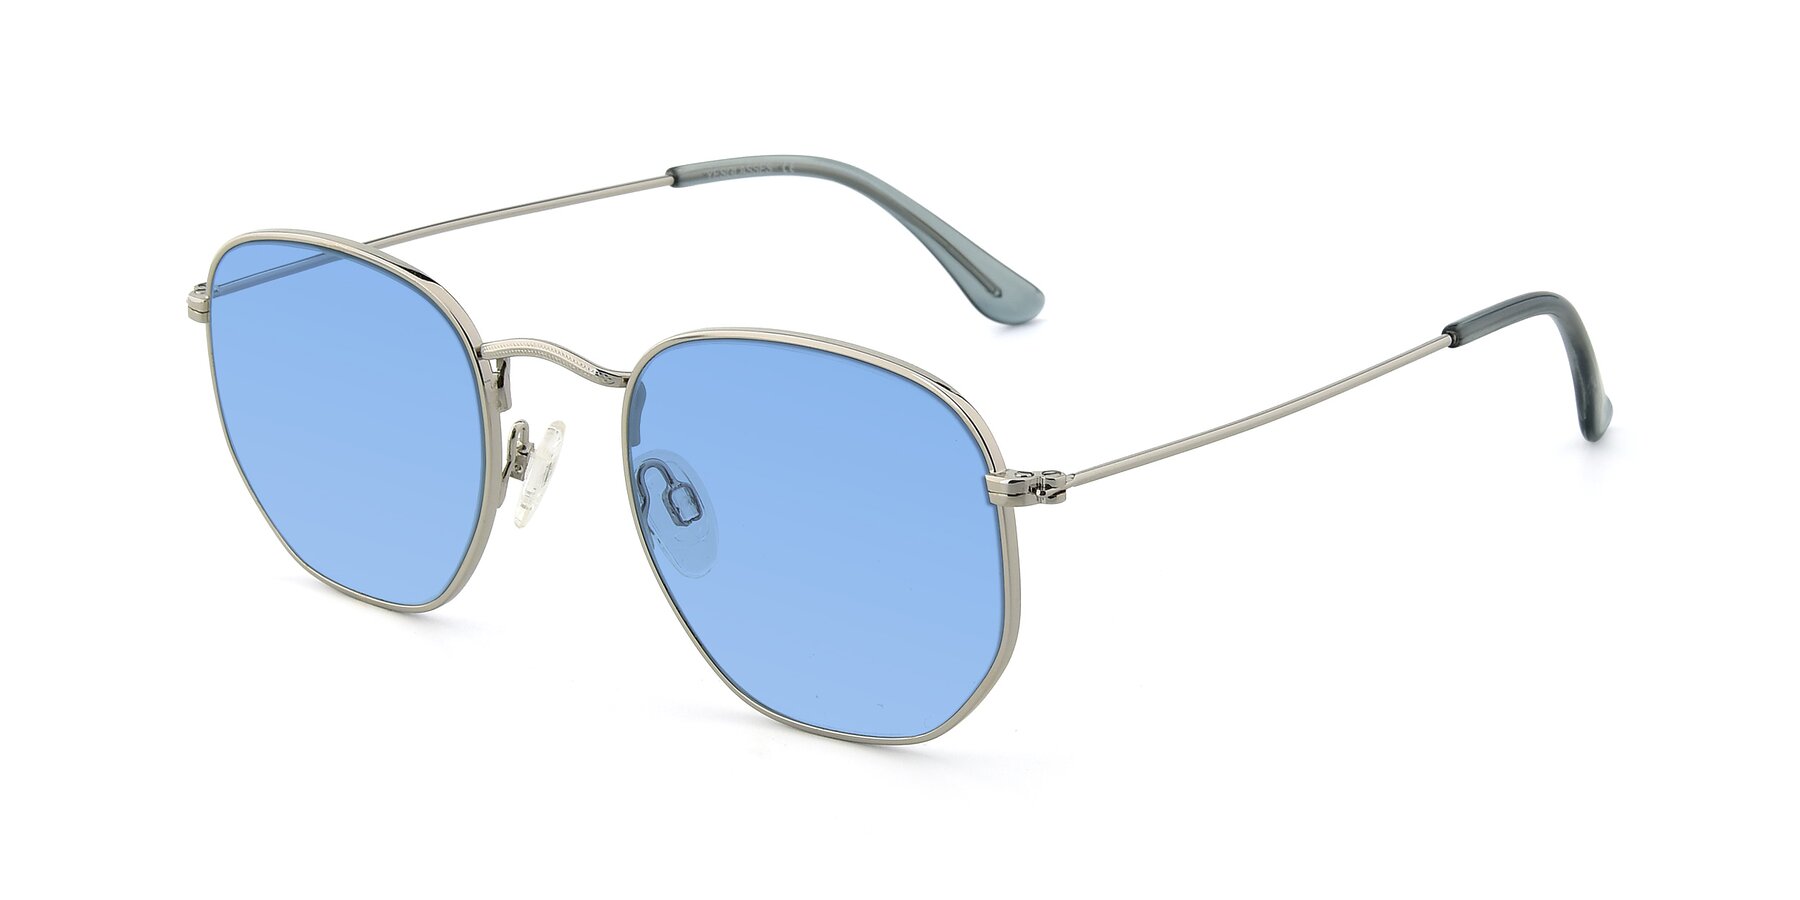 Angle of SSR1943 in Silver with Medium Blue Tinted Lenses